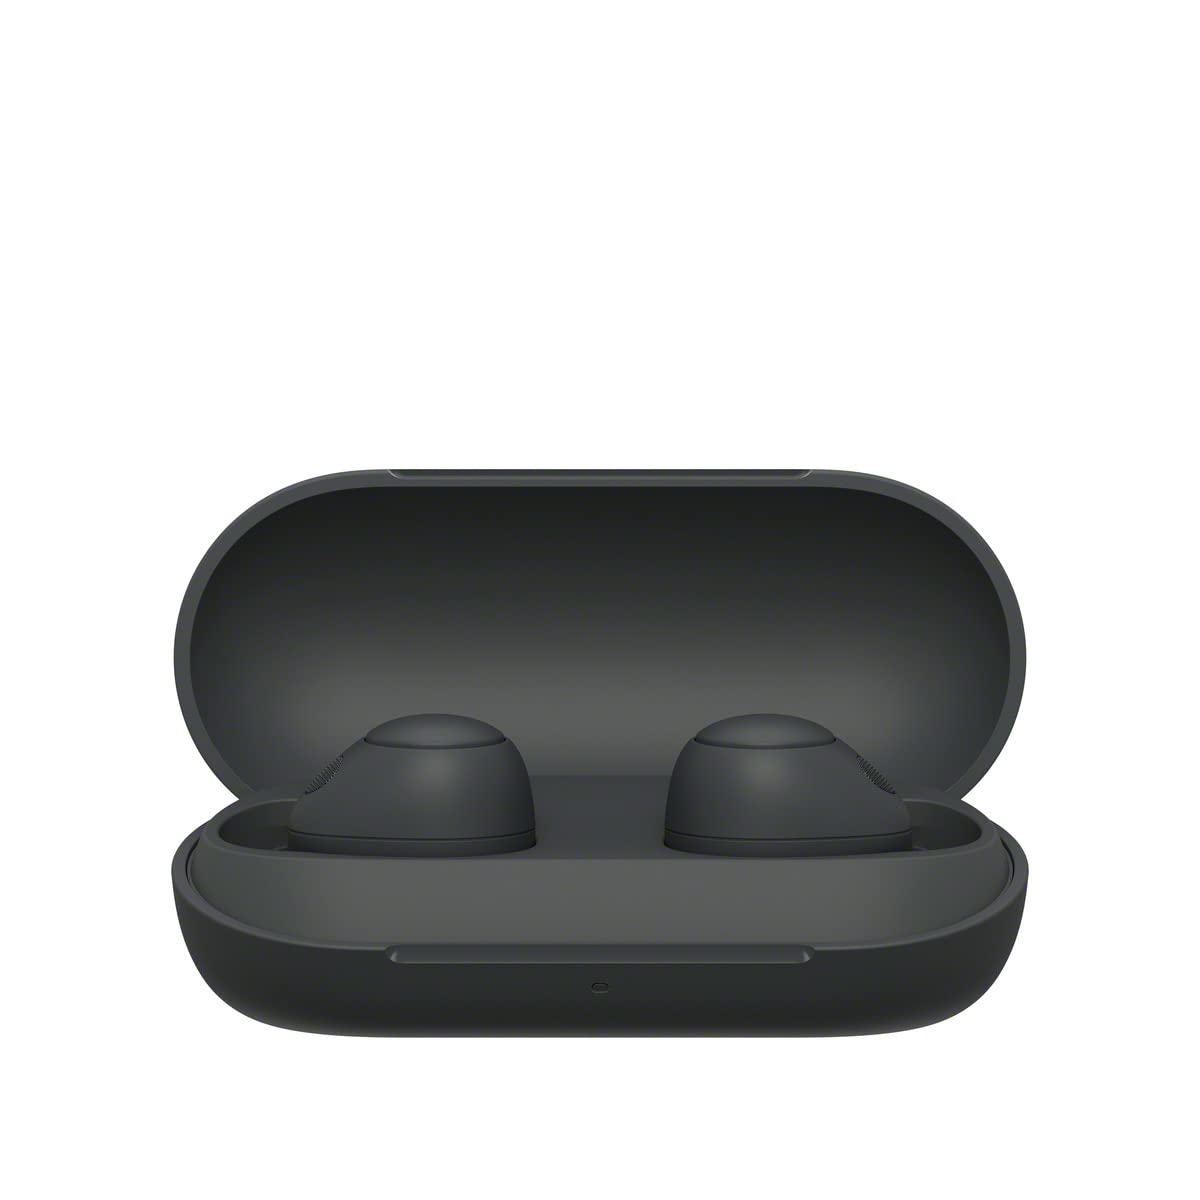 Sony WF-C700N Noise Cancelling True Wireless Bluetooth In-Ear Headphones  with Mic/Remote, Black